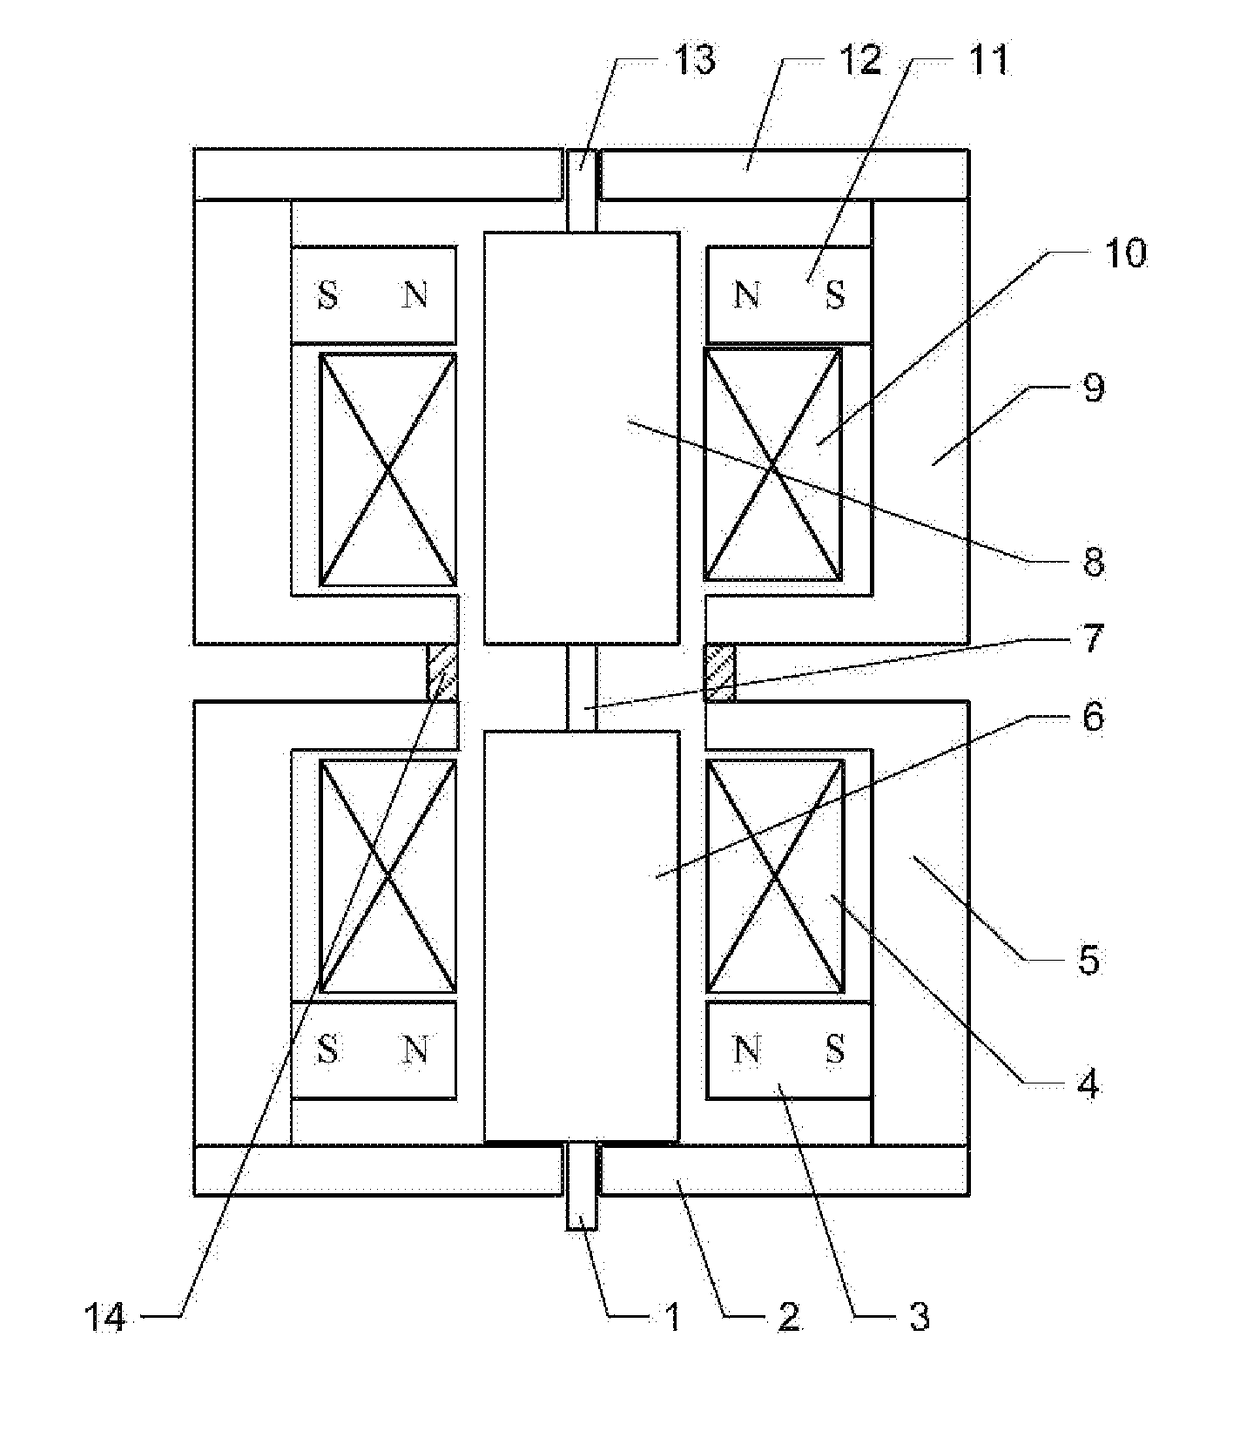 High-power bi-directional non-recovery spring magnetic valve comprising permanent magnet